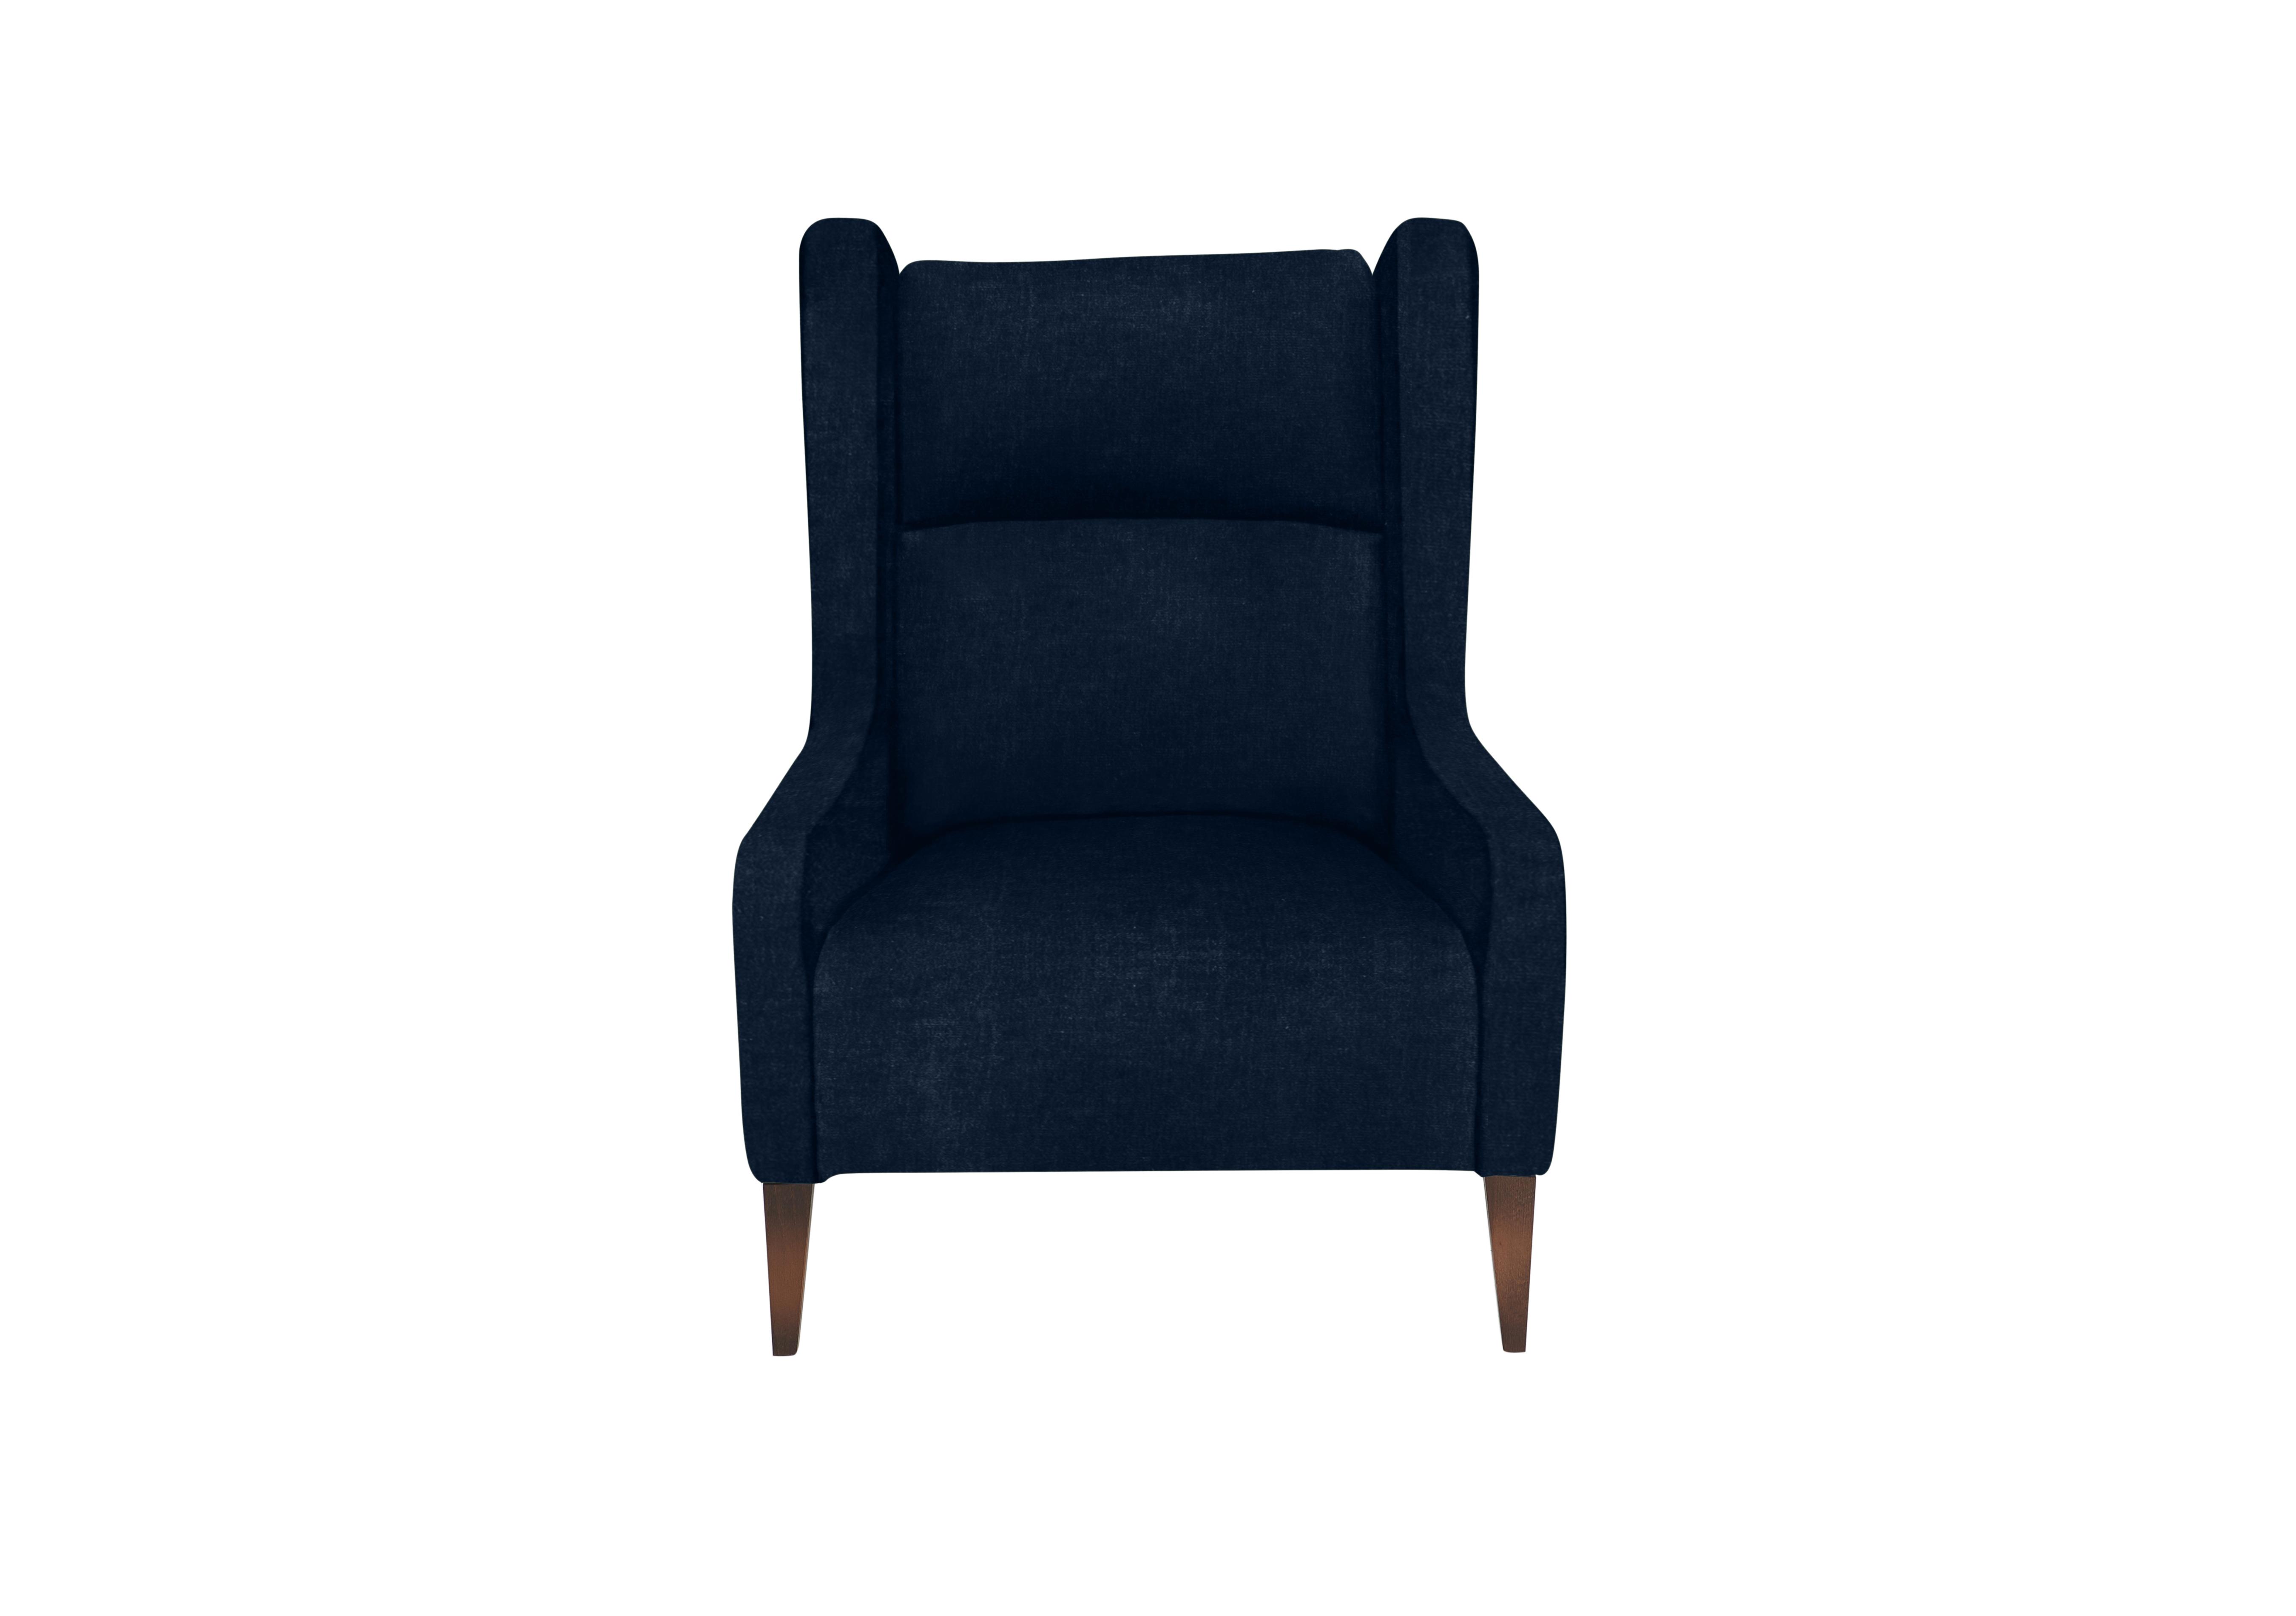 Boutique Palace Fabric Accent Chair in Oasis Navy on Furniture Village